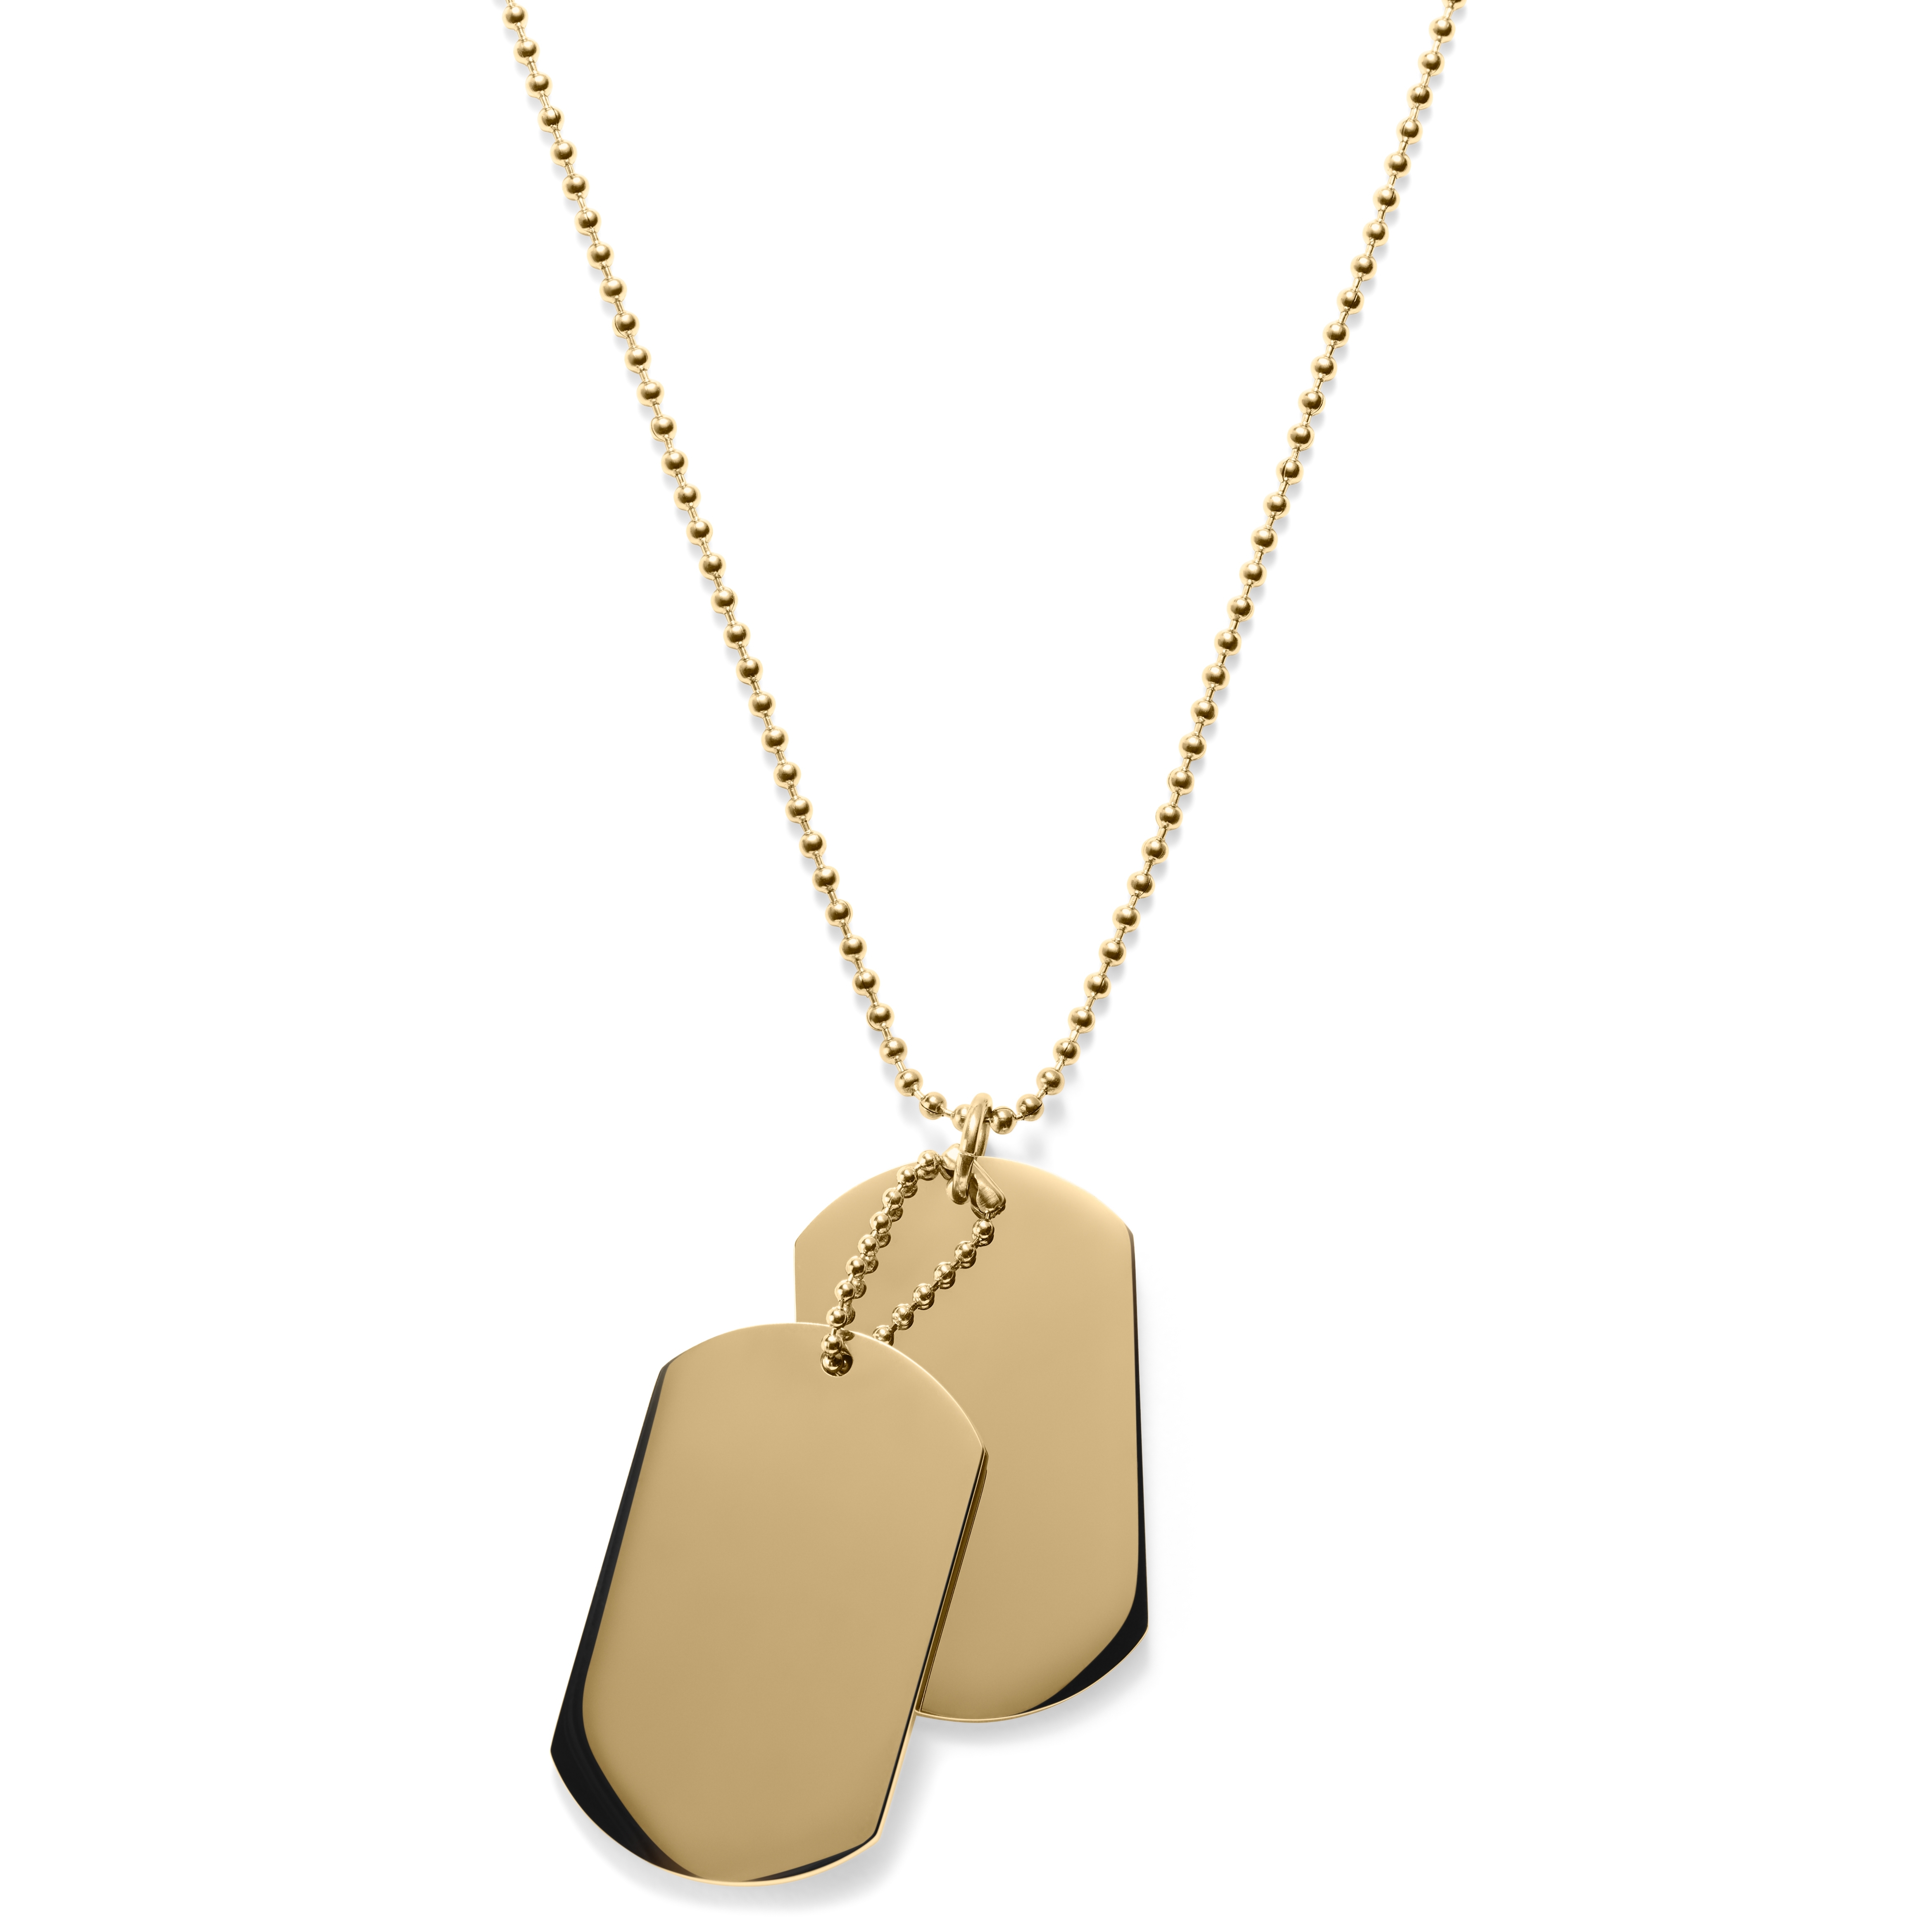 Men's Solitaire Cubic Zirconia and Gold-Tone Stainless Steel Dog Tag  Pendant Necklace - Walmart.com